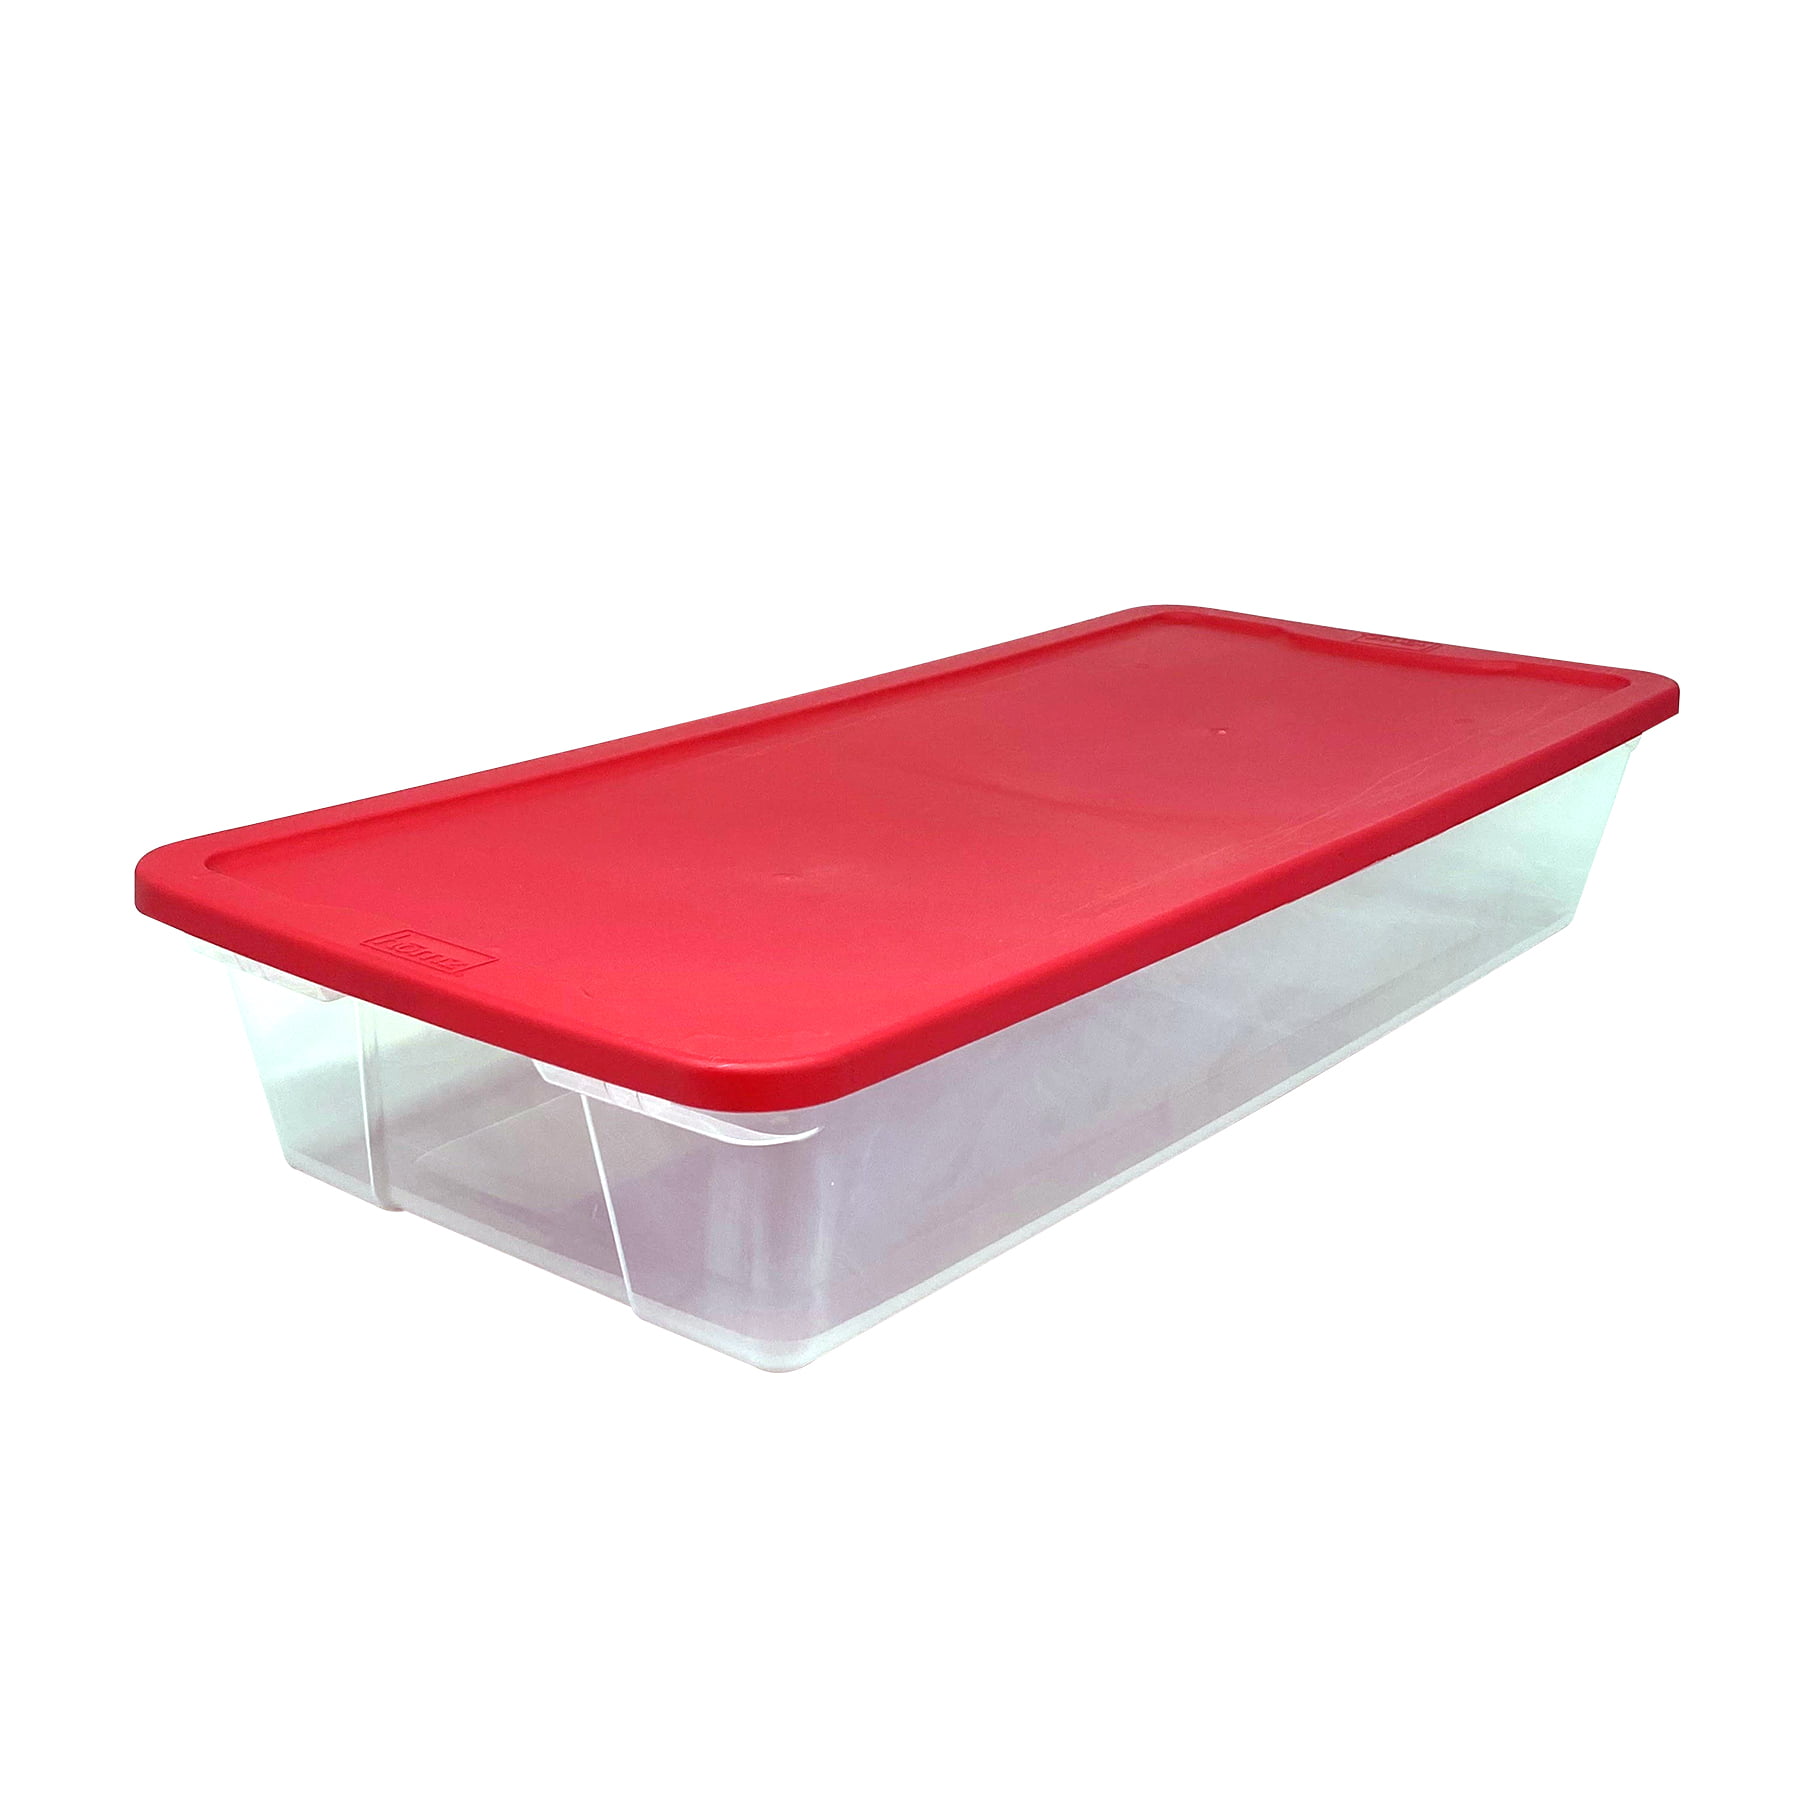 41 Quart 34.375 x 15.5 x 6 2 Sets HOMZ Holiday Plastic Storage Container Clear//Red